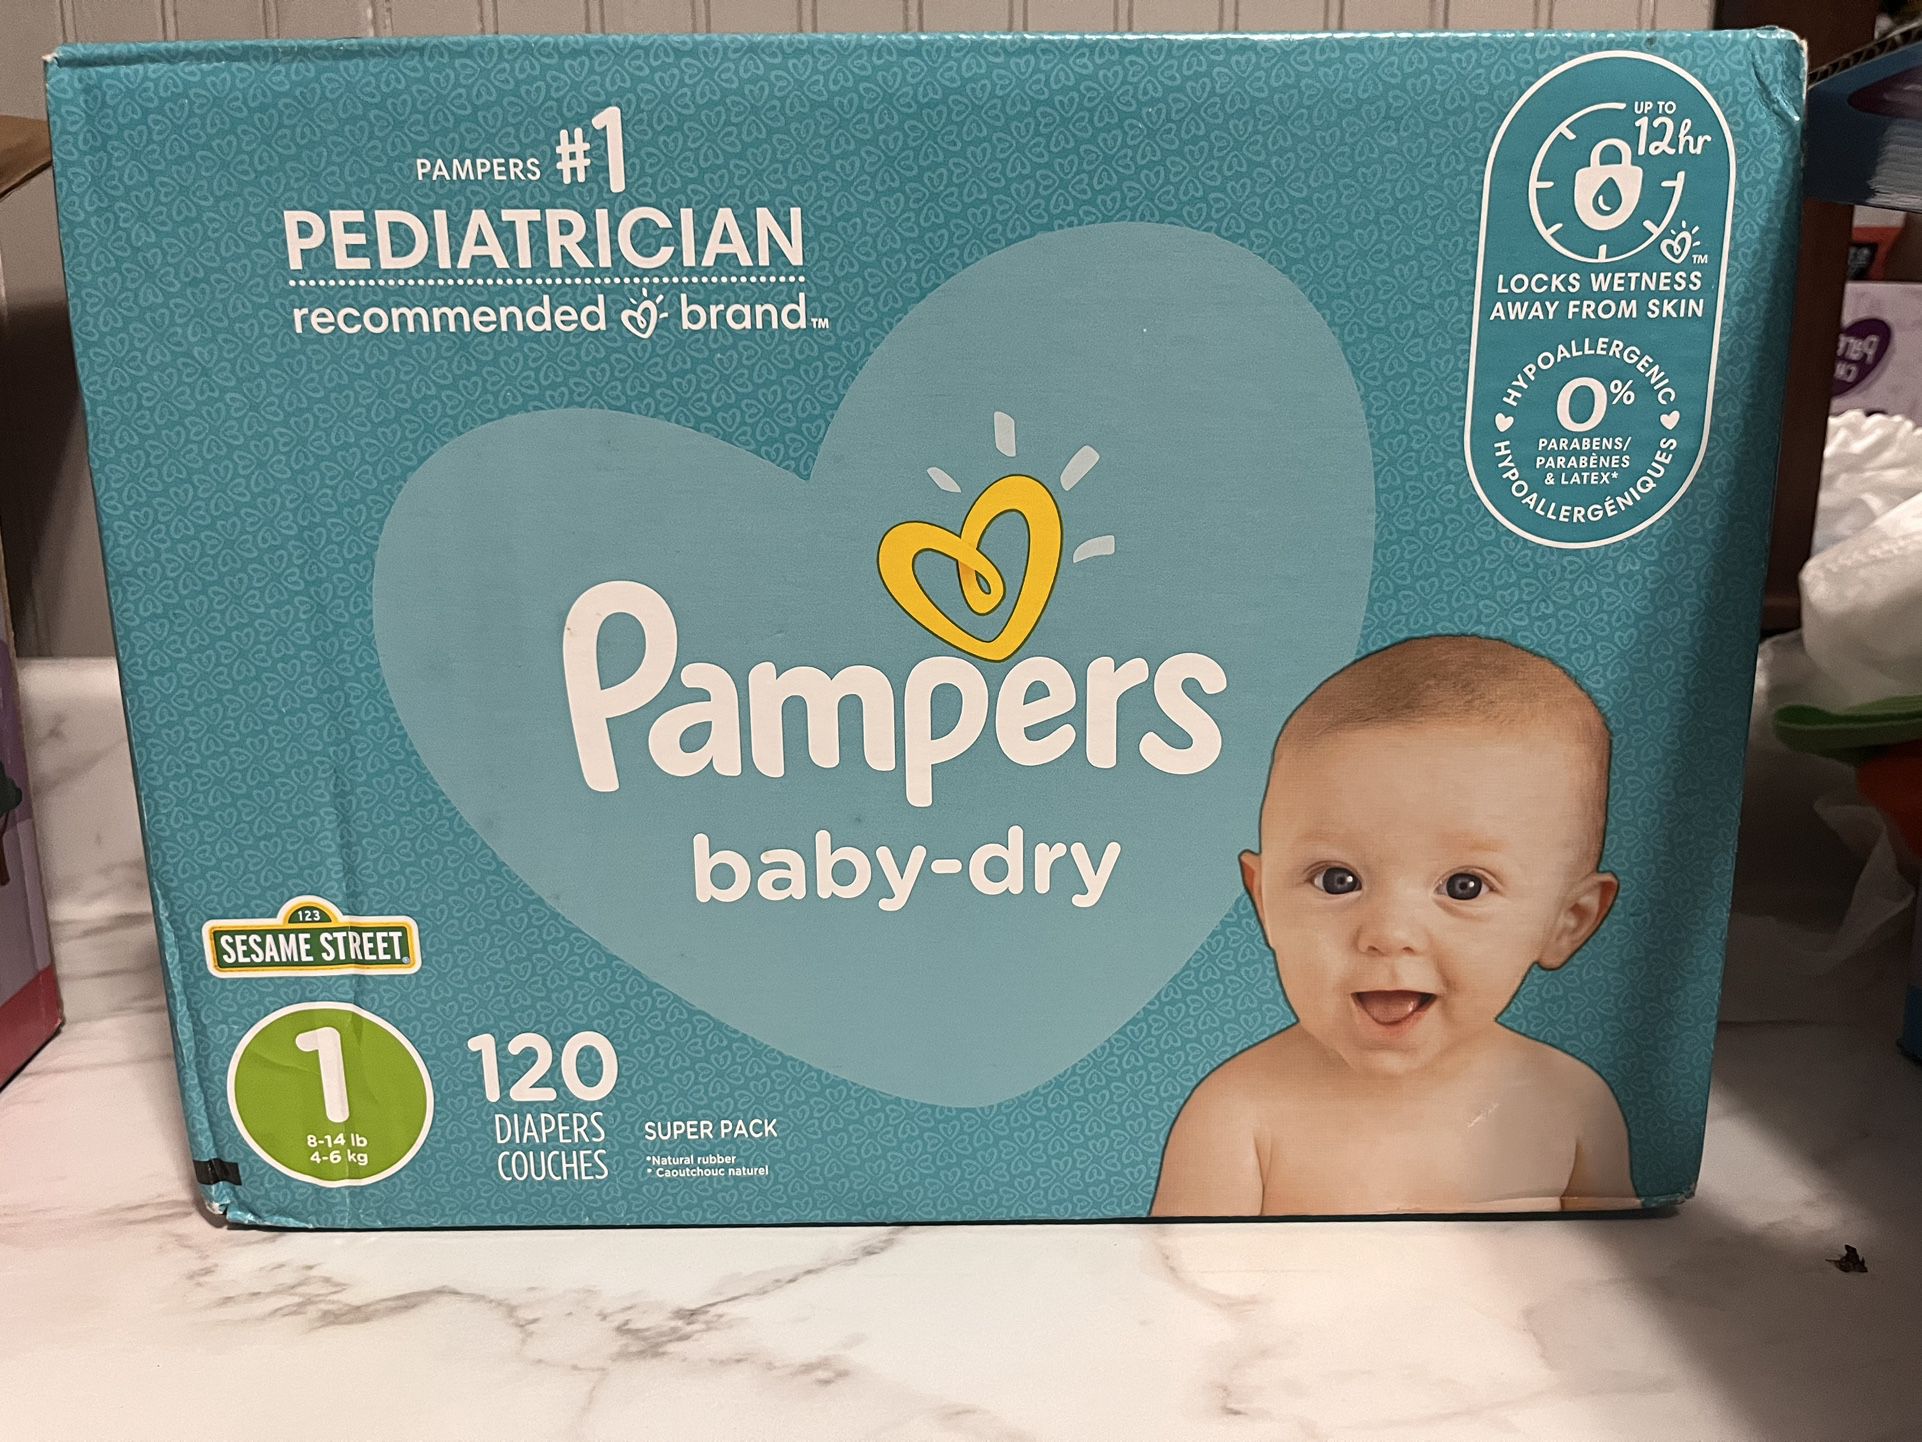 Pampers Baby Dry 